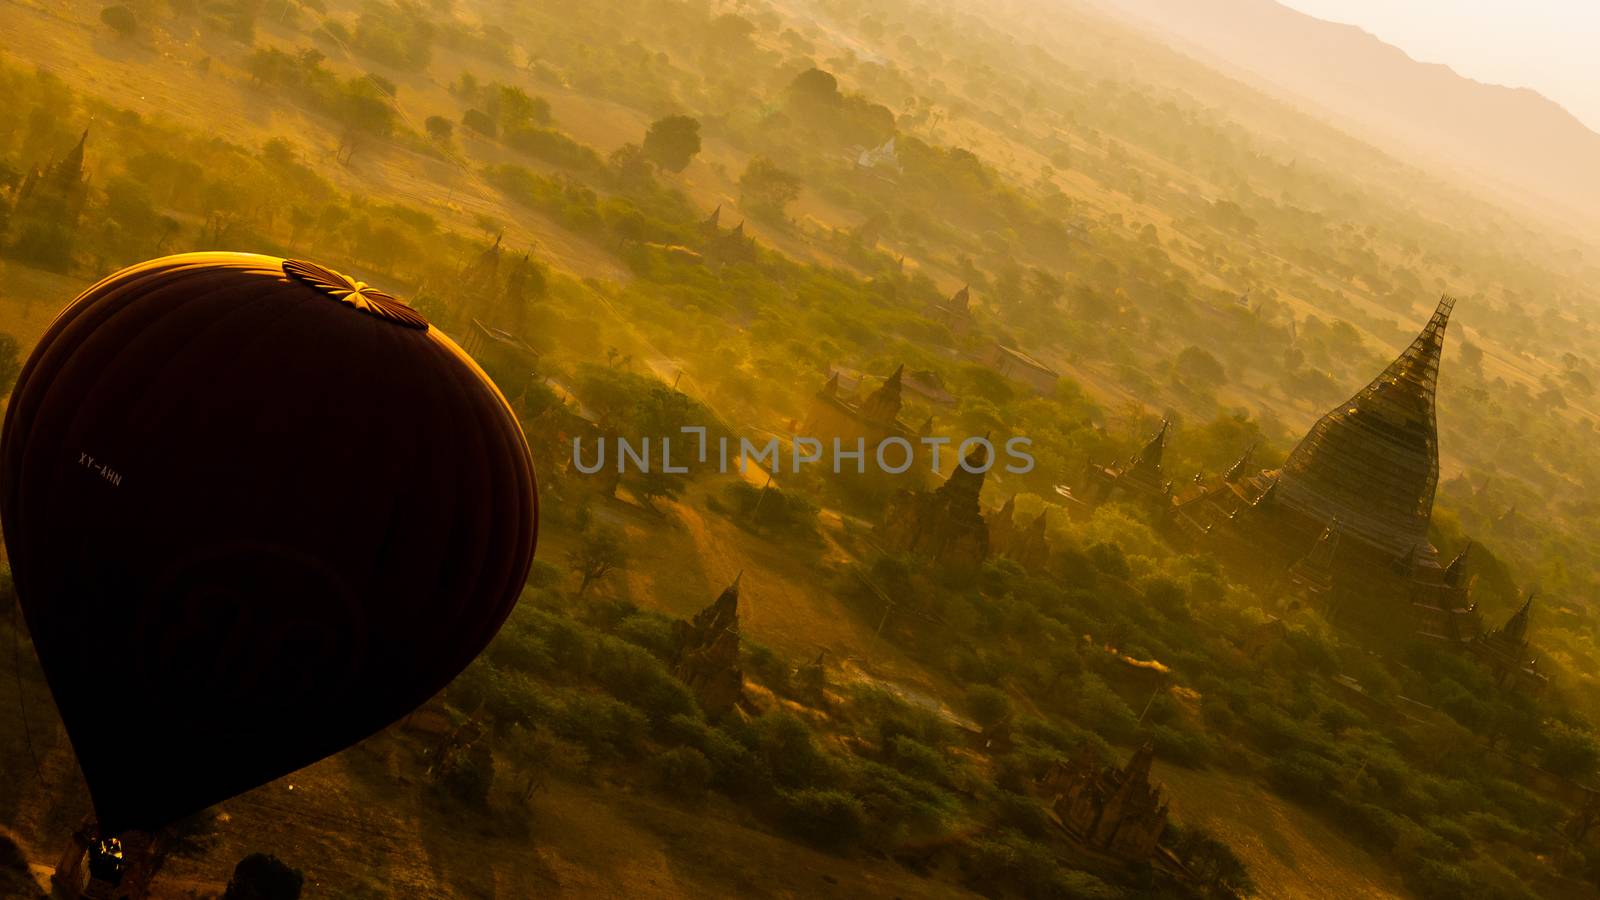 A balloon flying over the breathtaking scenery in Bagan Myanmar